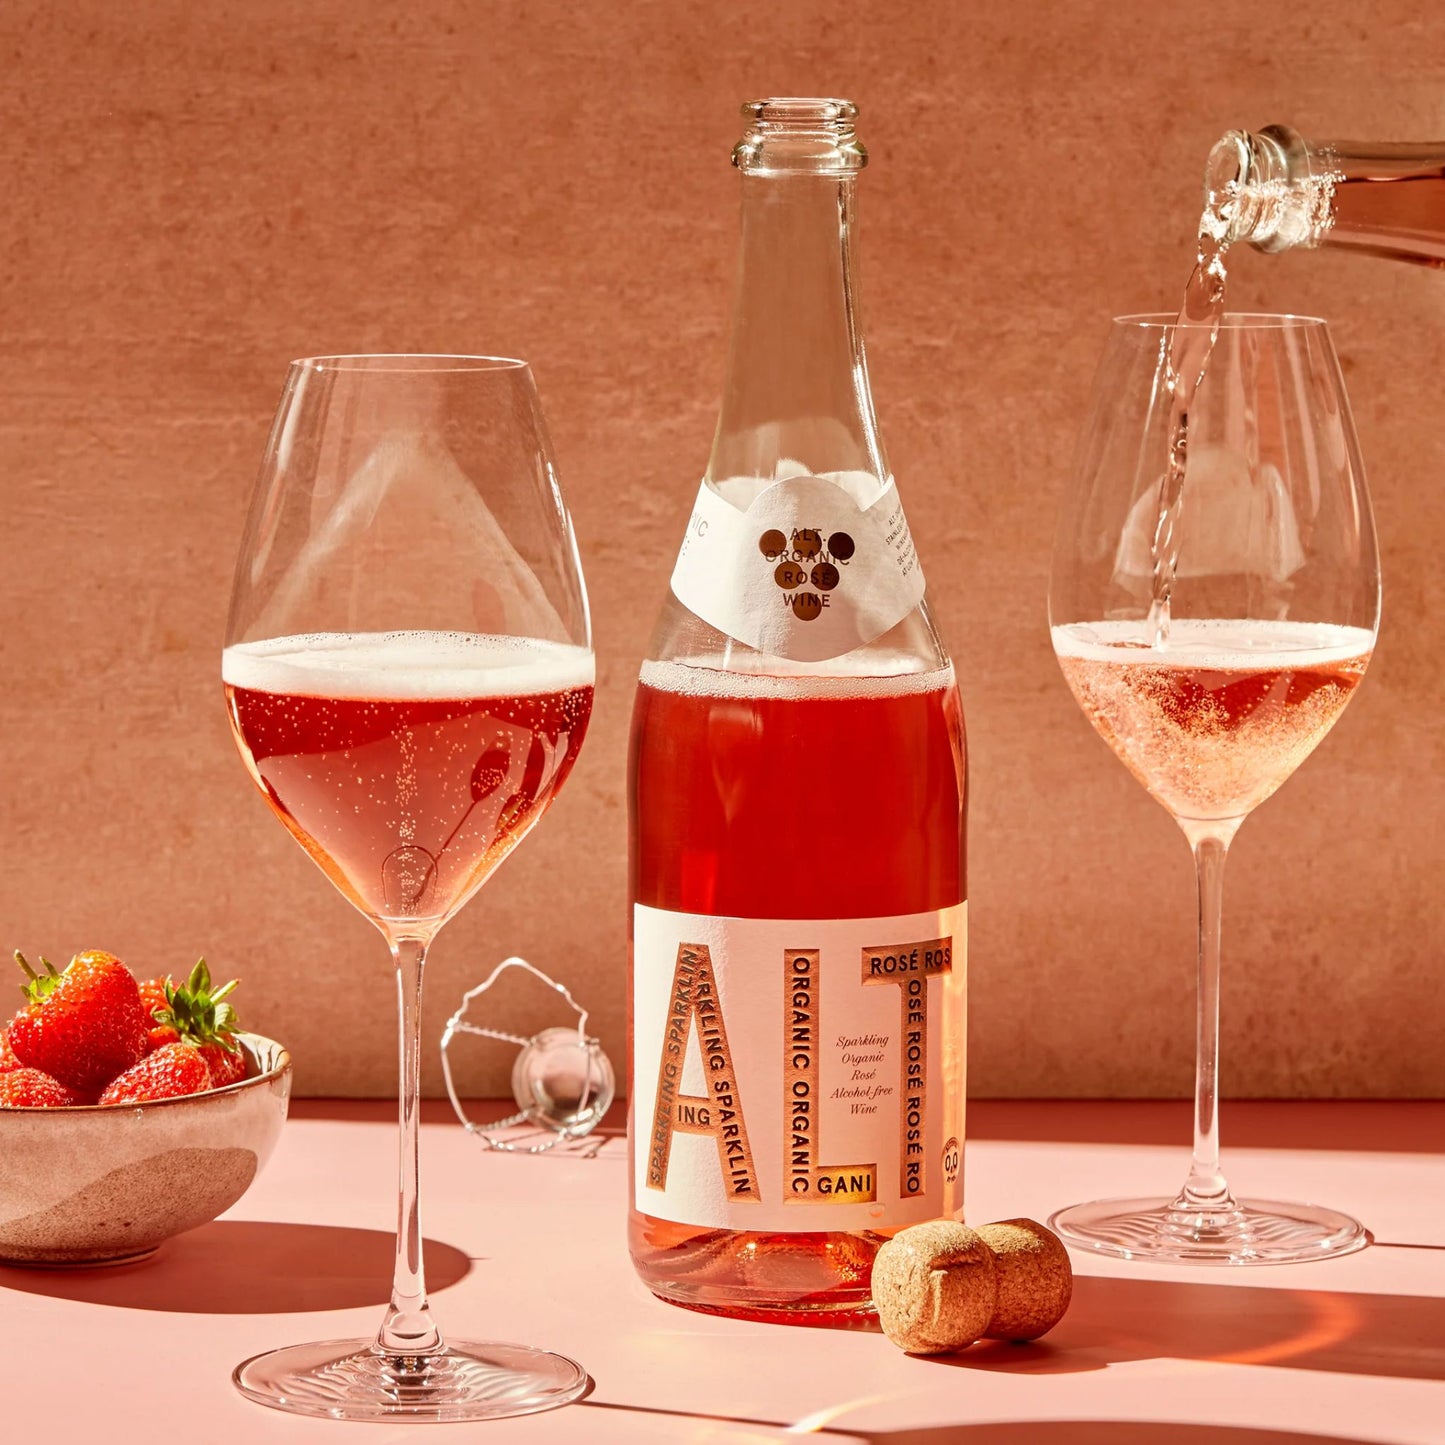 ALT. Non-Alcoholic Sparkling Organic Rosé is available at Knyota Non-Alcoholic Drinks.